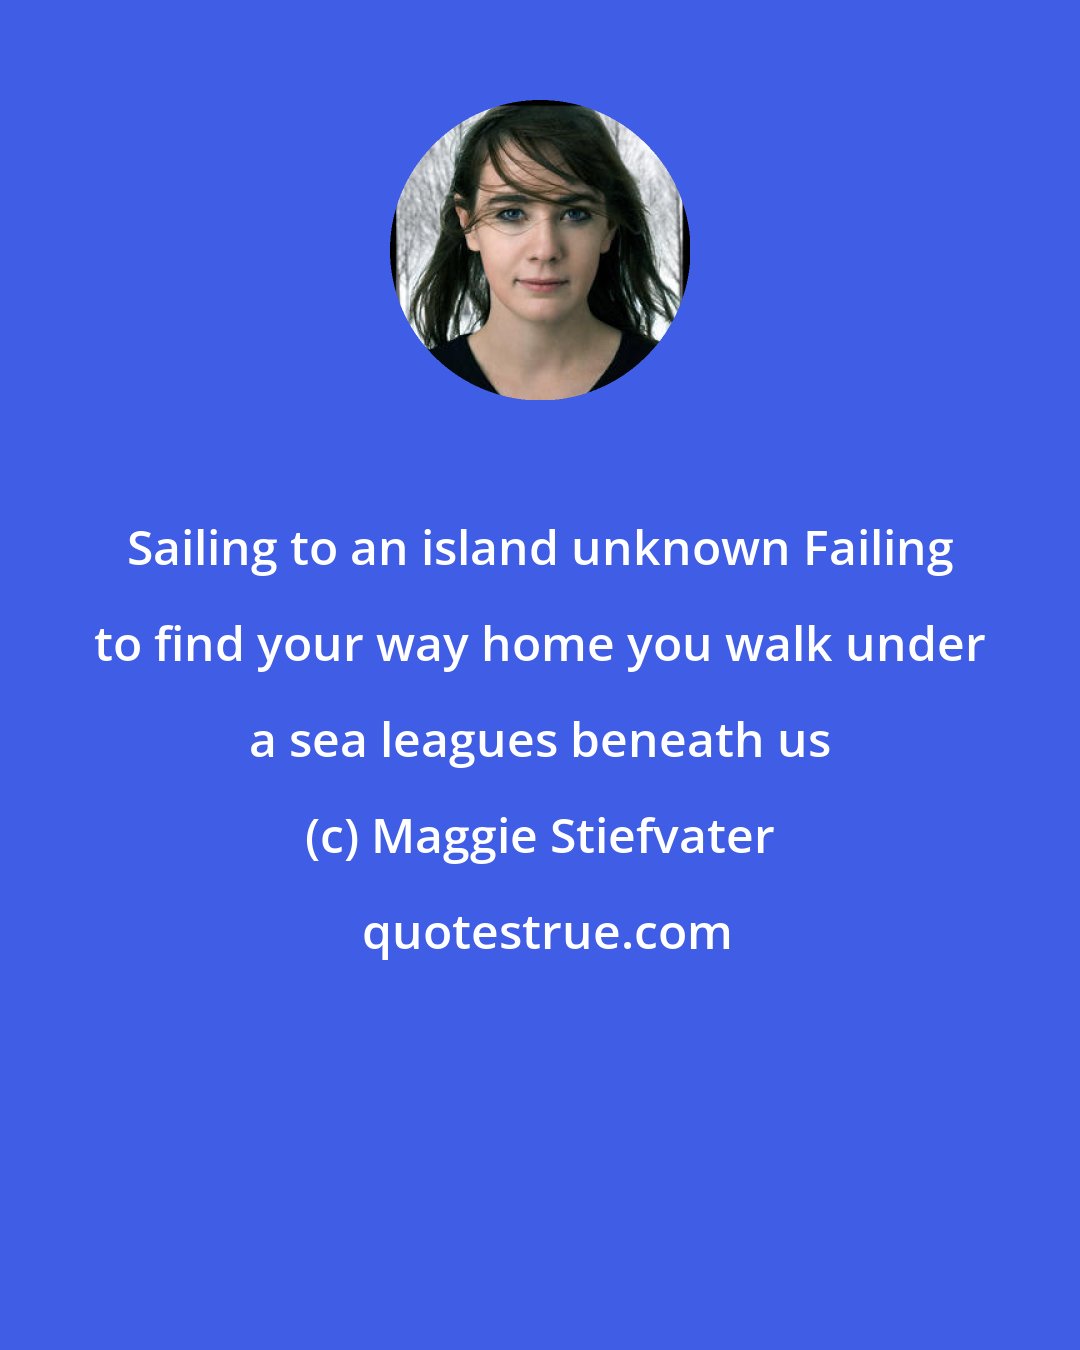 Maggie Stiefvater: Sailing to an island unknown Failing to find your way home you walk under a sea leagues beneath us